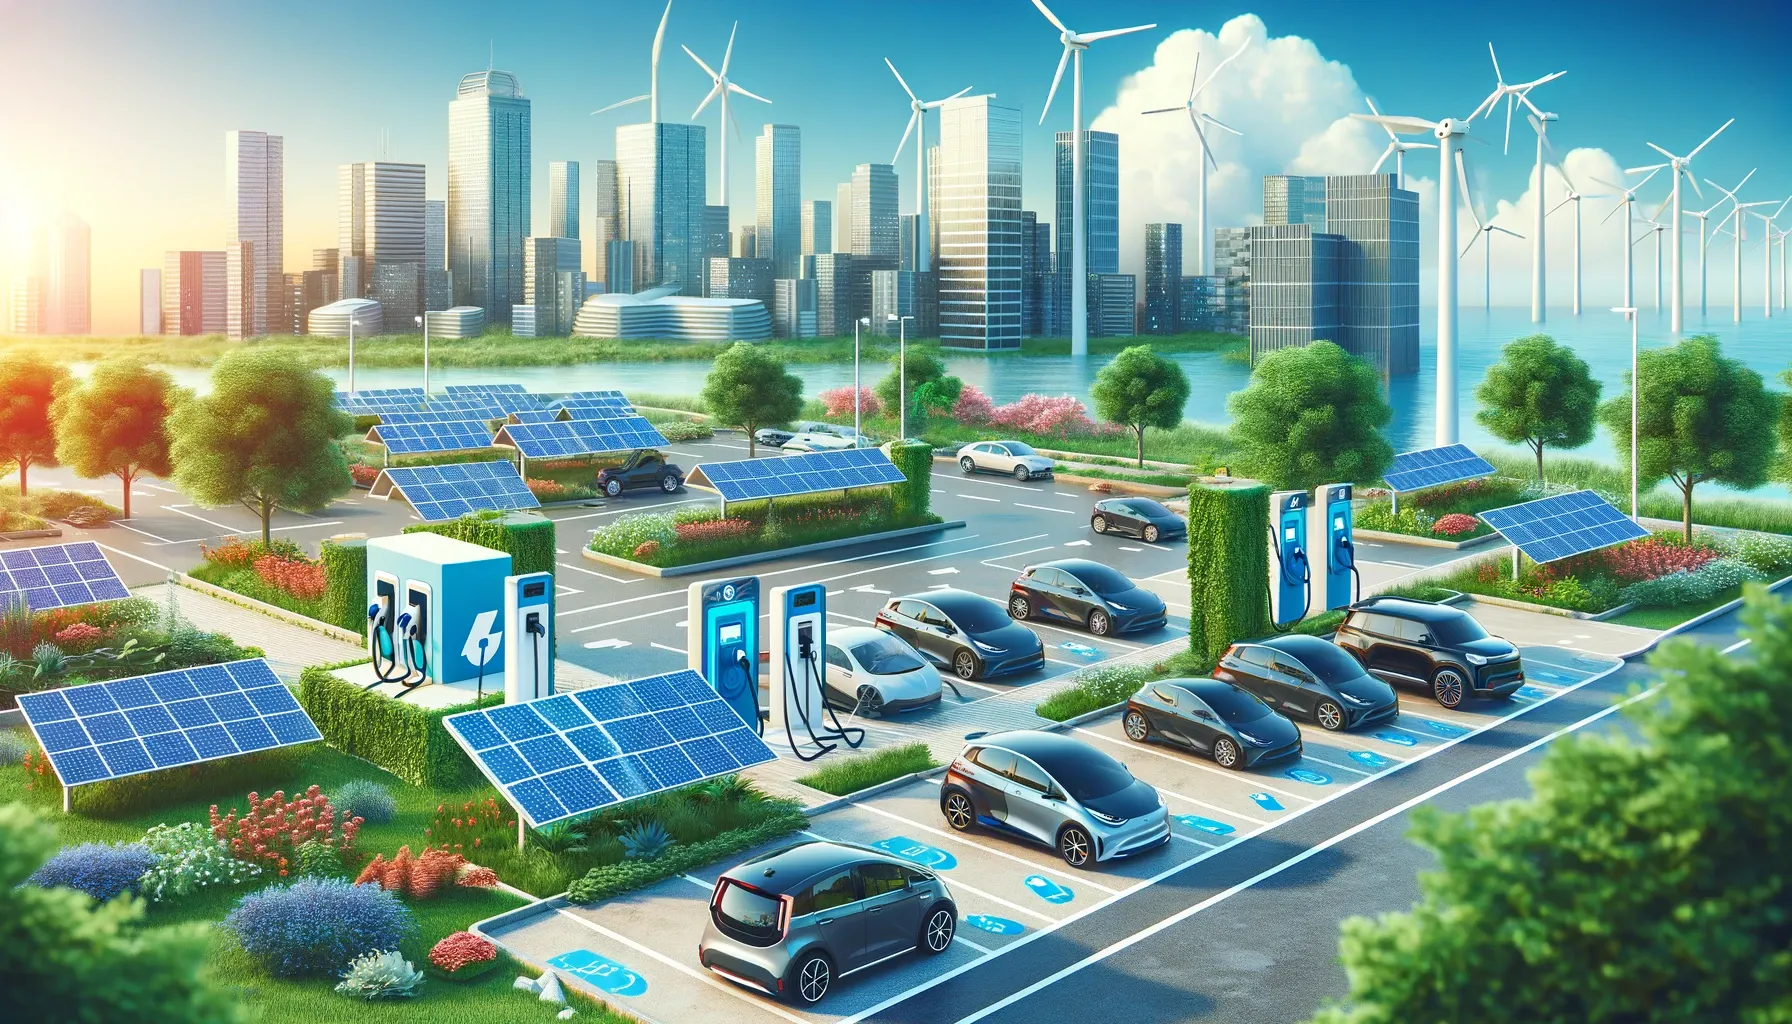 Electric Cars and Shared Car Services